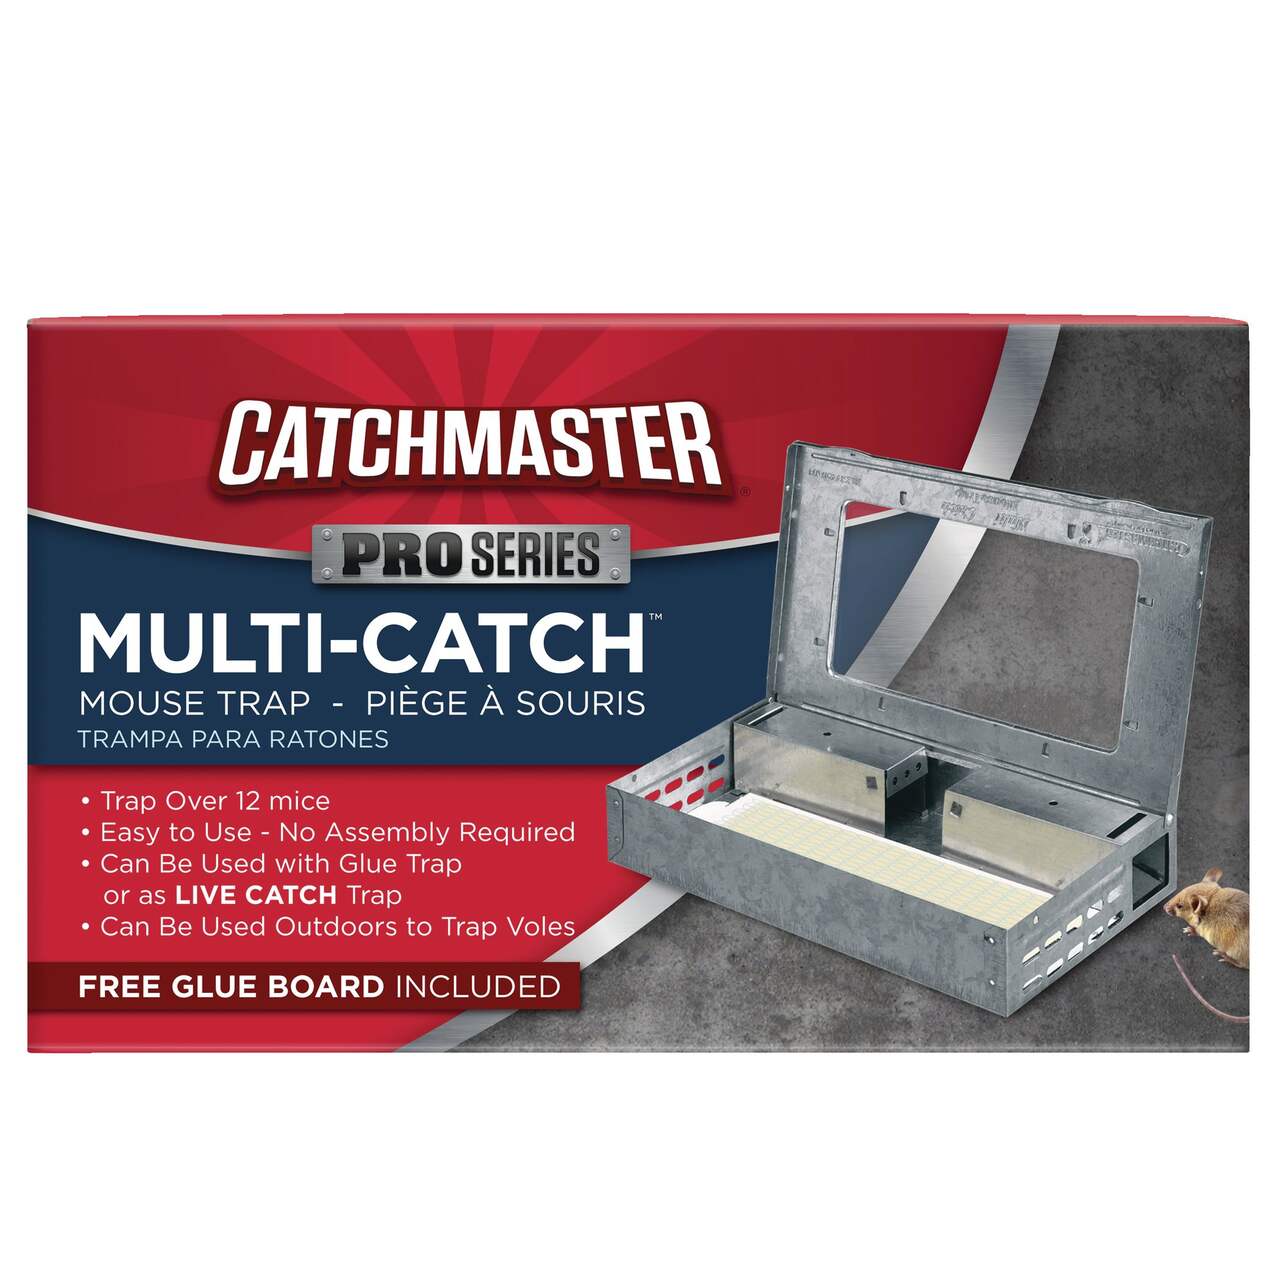 https://media-www.canadiantire.ca/product/seasonal-gardening/gardening/weed-insect-rodent-control/0593615/catchmaster-multiple-catch-metal-mouse-trap-f685e861-d1fe-4484-a081-f4d8c18fc800-jpgrendition.jpg?imdensity=1&imwidth=1244&impolicy=mZoom